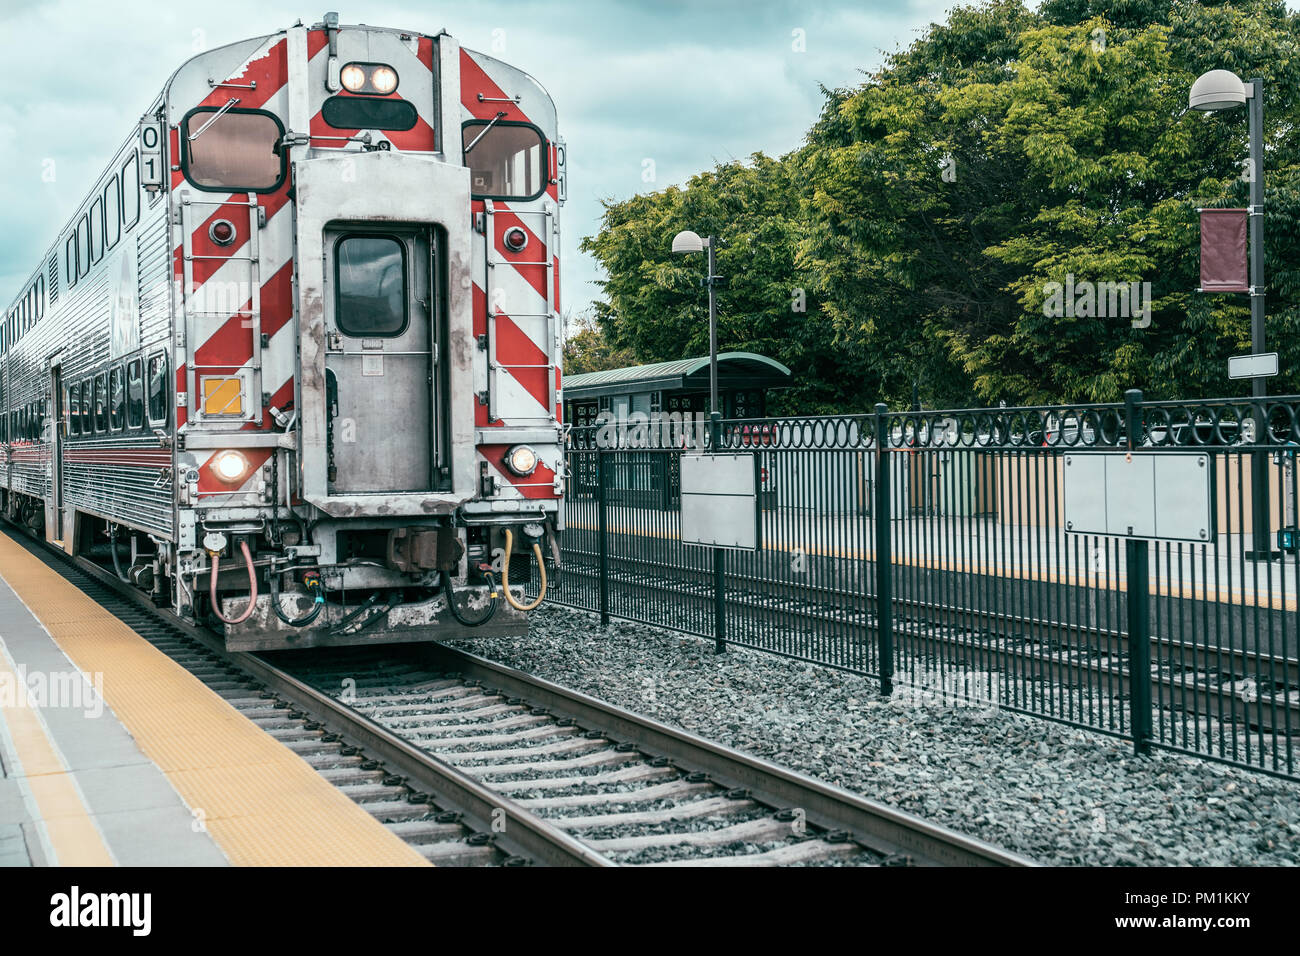 the view of train stopped on the railroad in a station in san francisco of the united states. Stock Photo